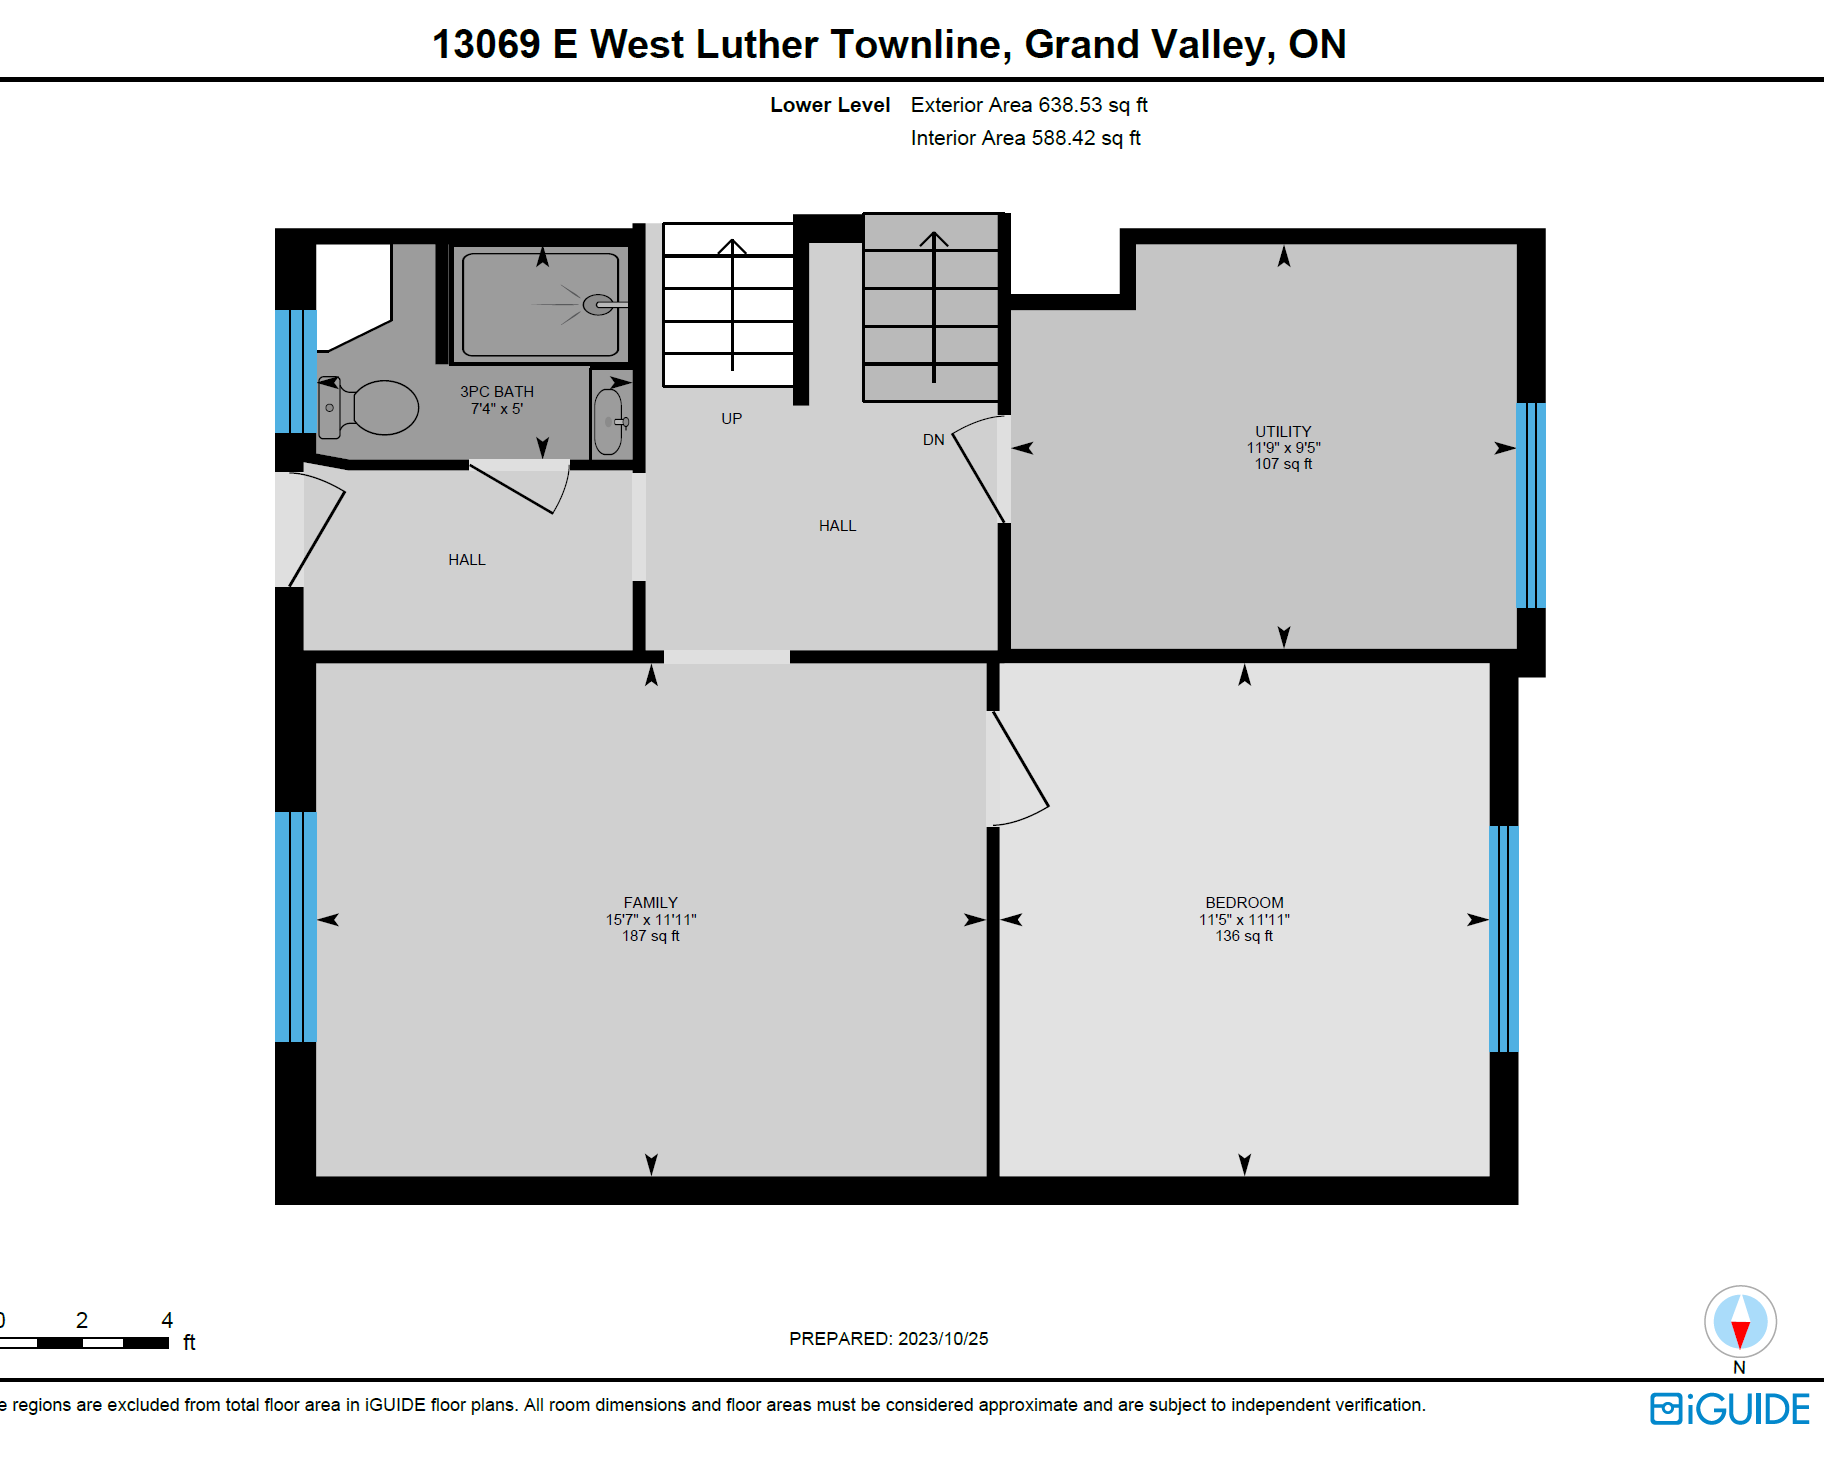 a floor plan of a house in grand valley ontario